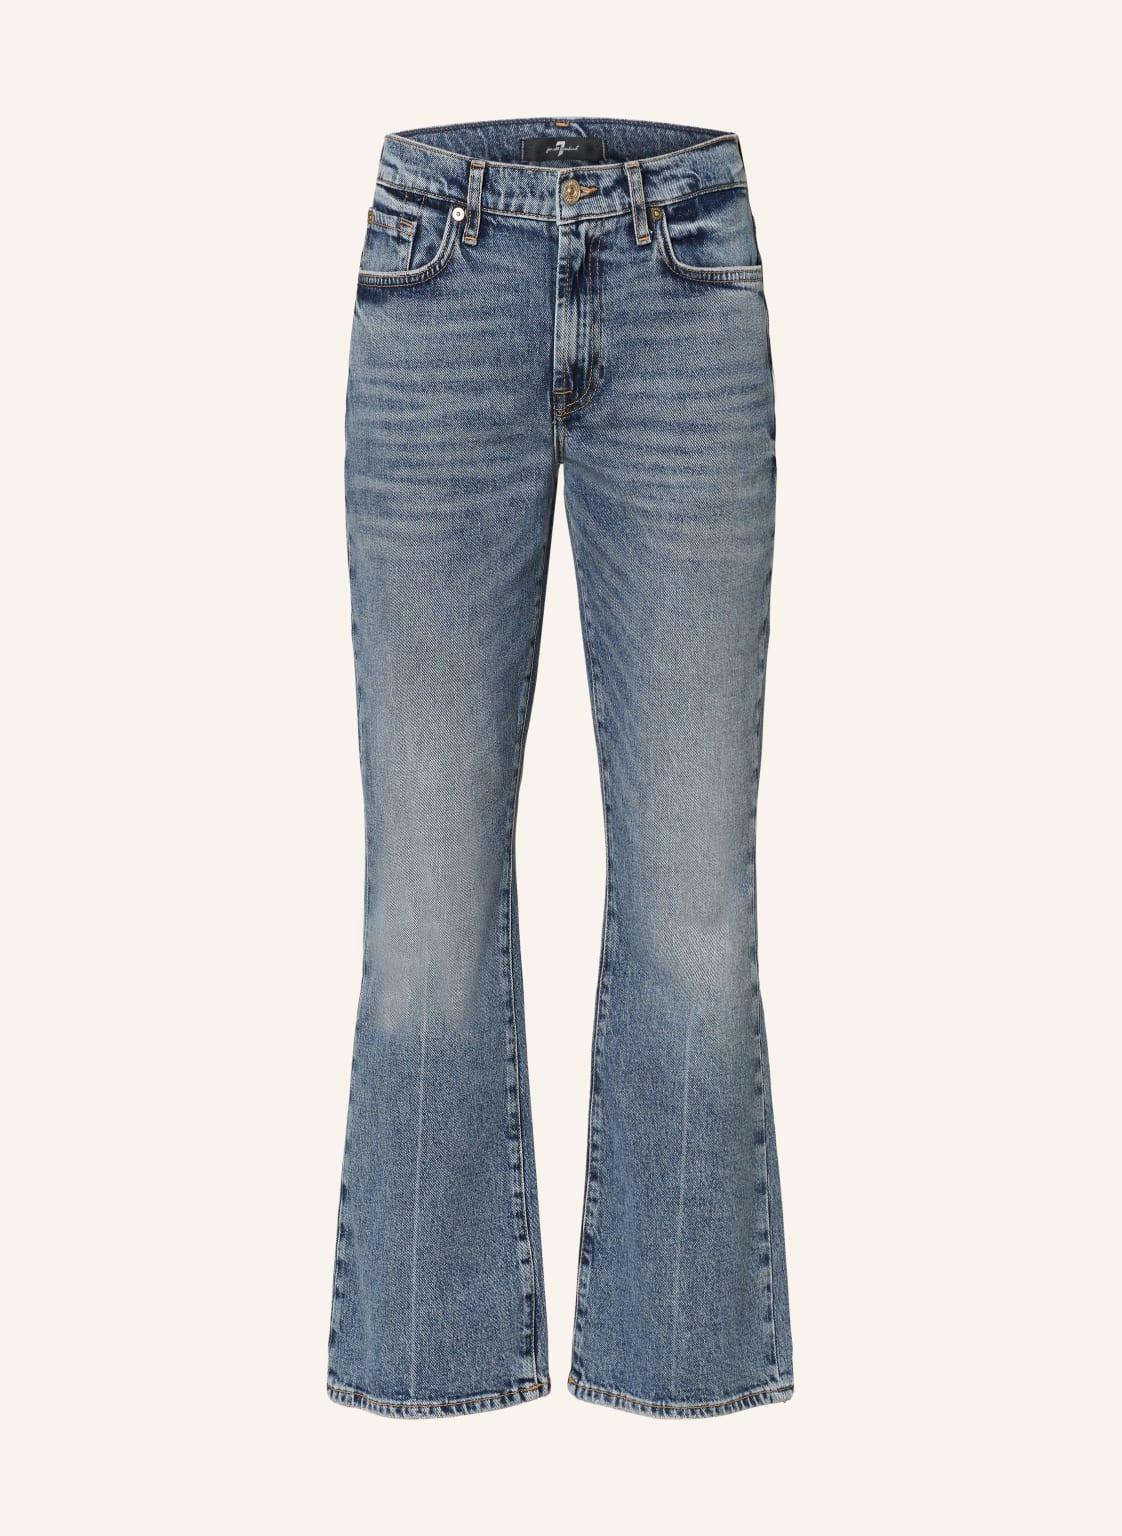 7 For All Mankind Bootcut Jeans Betty blau von 7 For All Mankind